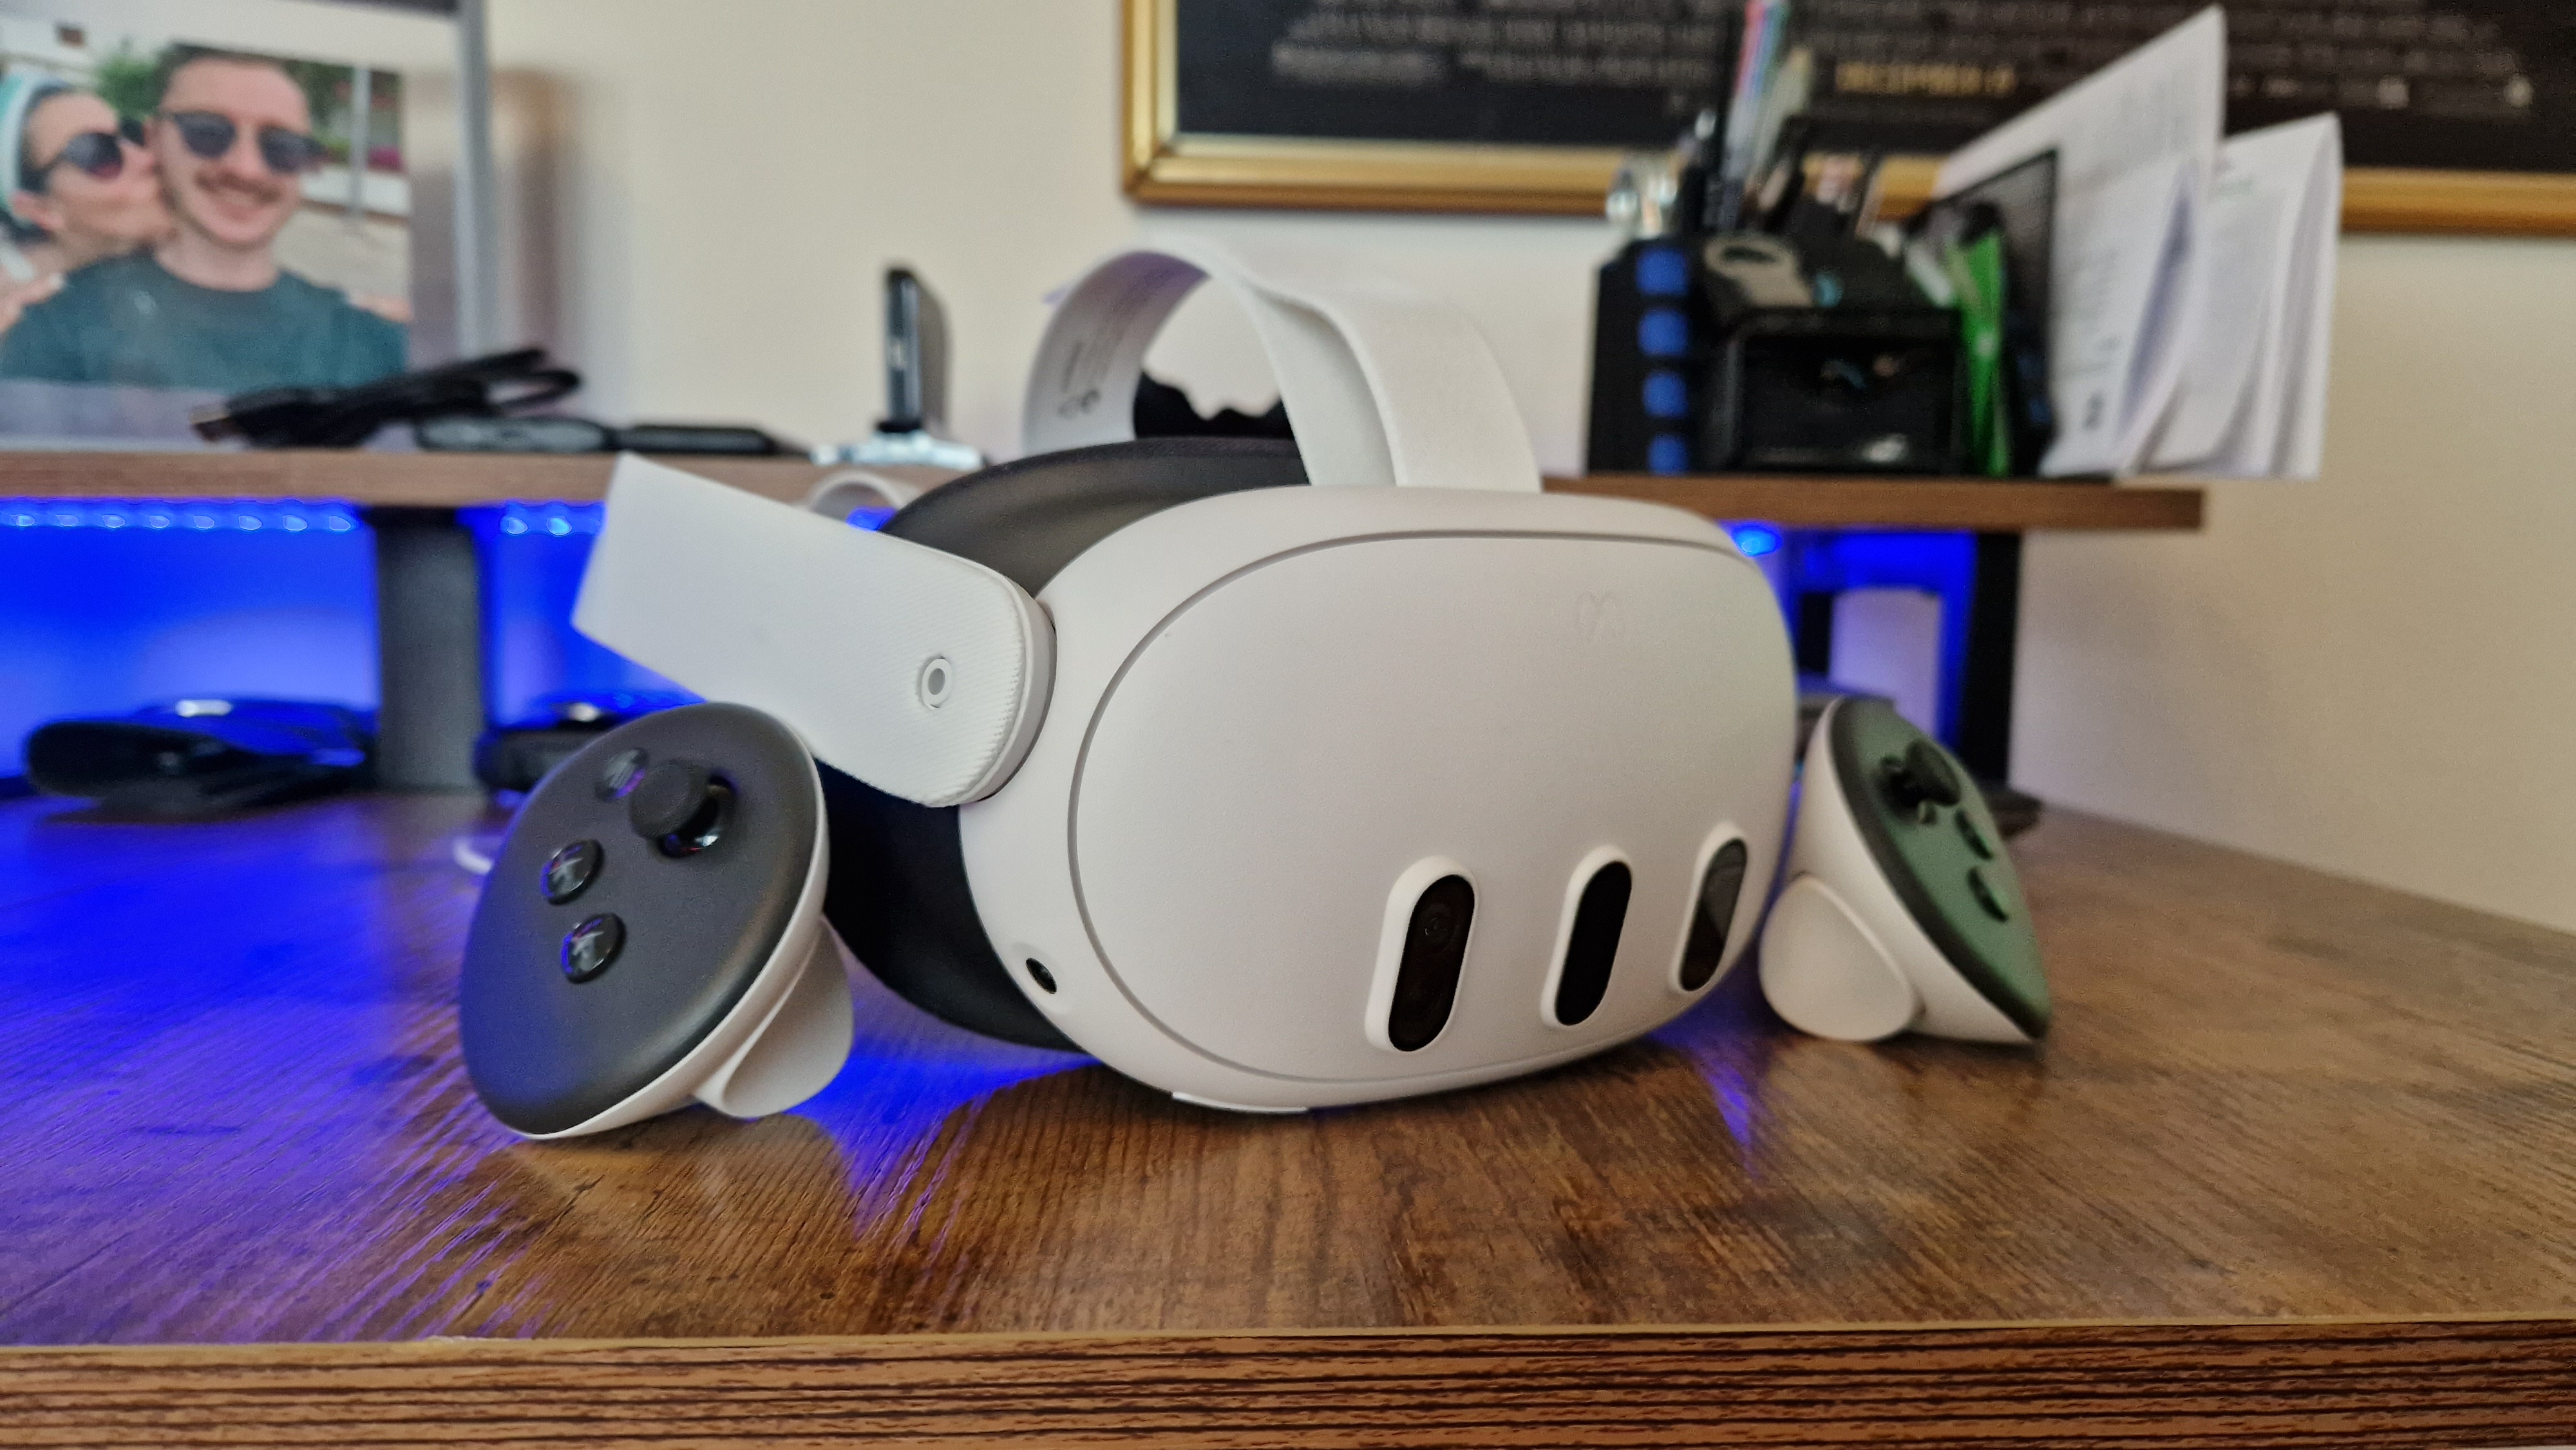 Meta Quest 3 and PSVR 2 – Which VR Headset Is Right for You?